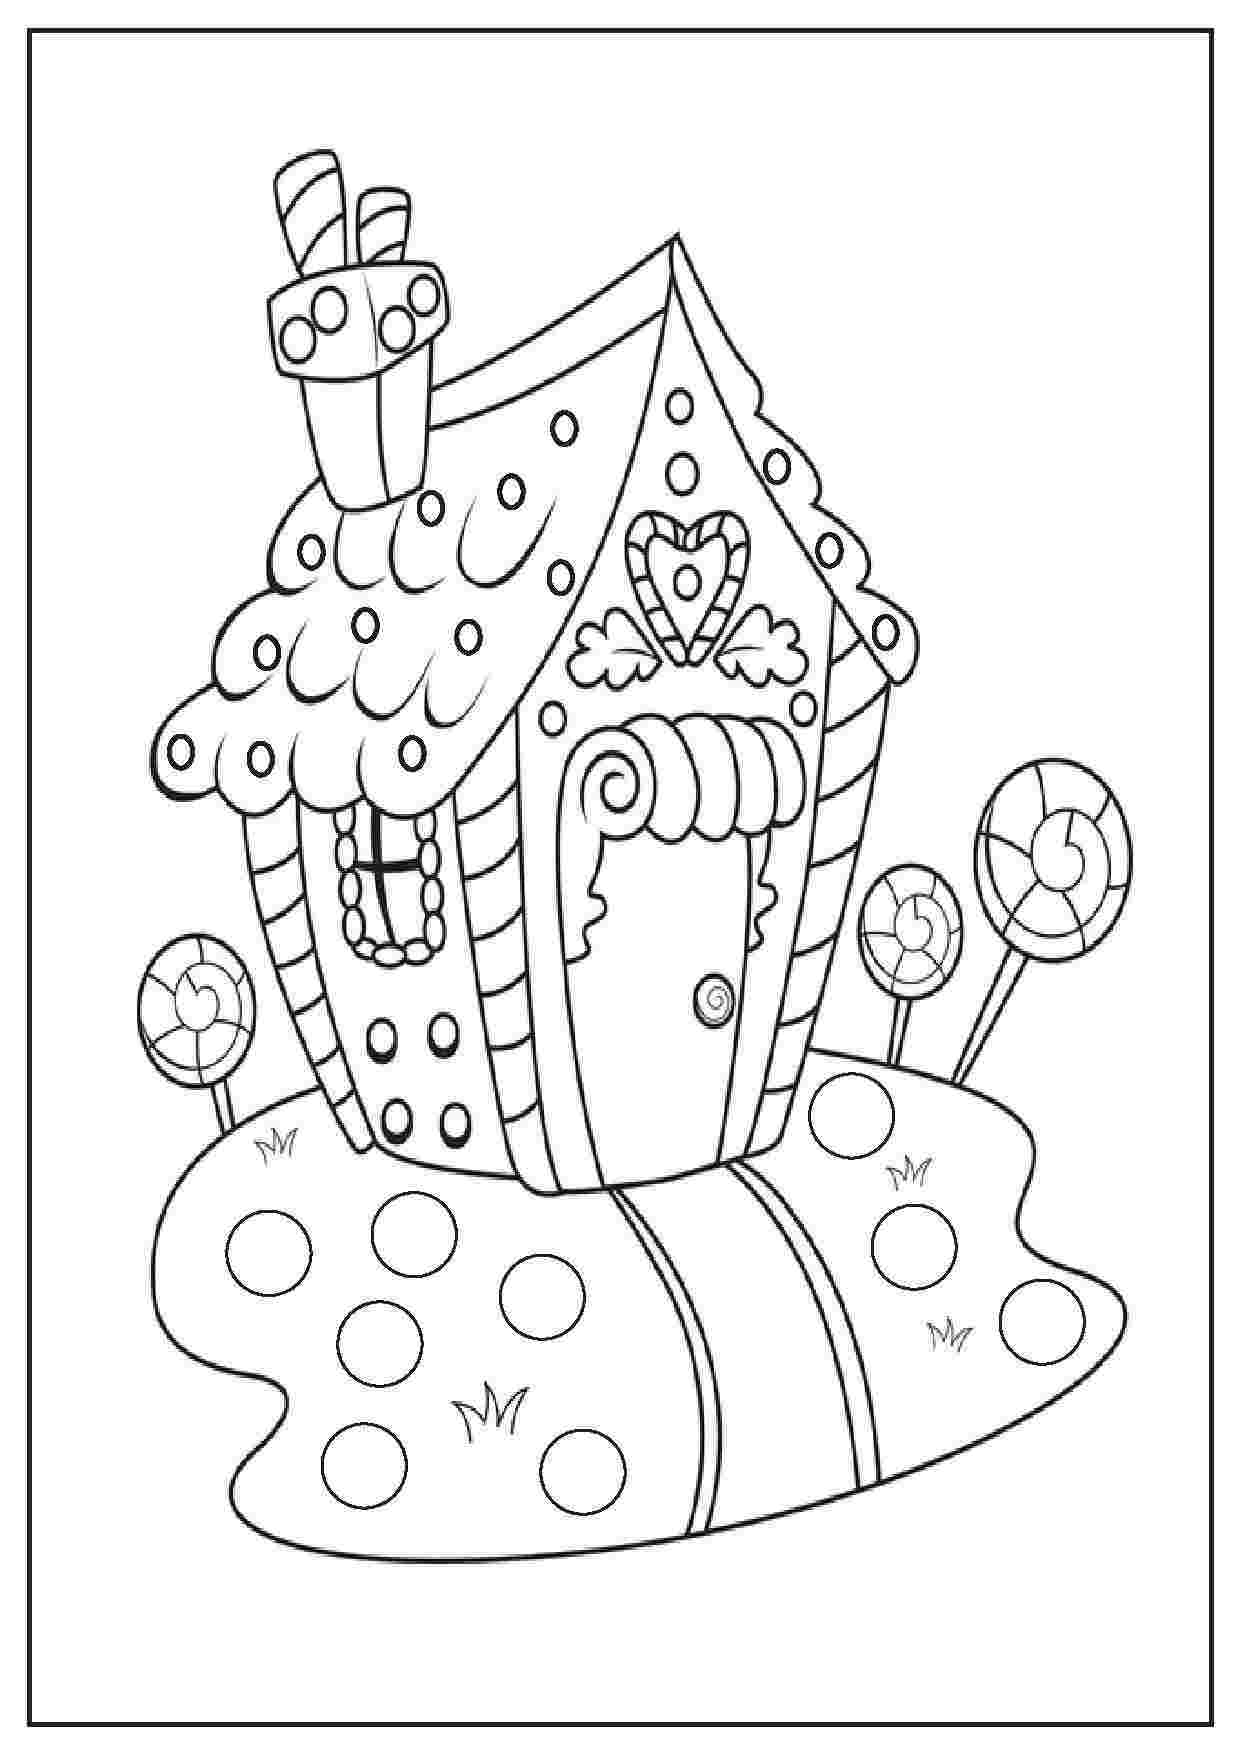 Worksheets Coloring Pages   Coloring Home